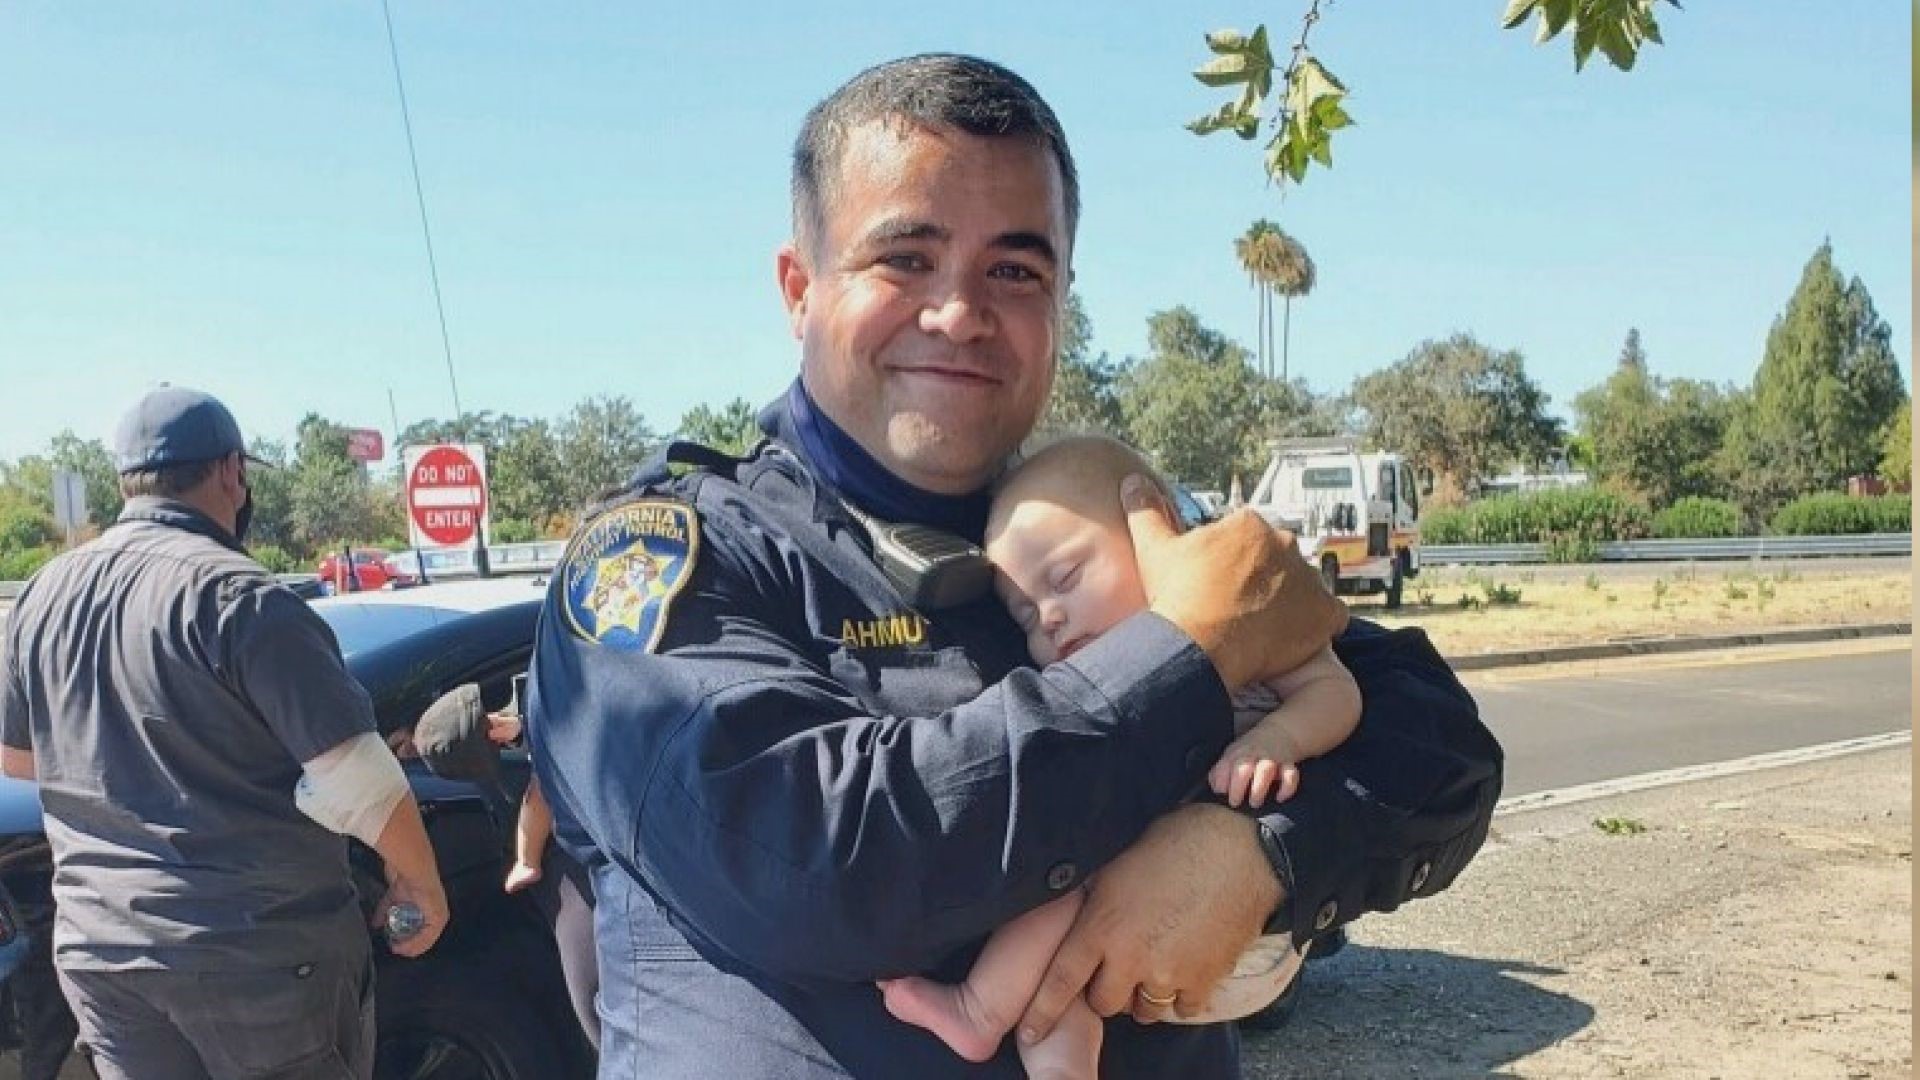 The North Sacramento CHP officer says he wanted to lend a helping hand to the mother whose other kids were trying to get her attention, too.